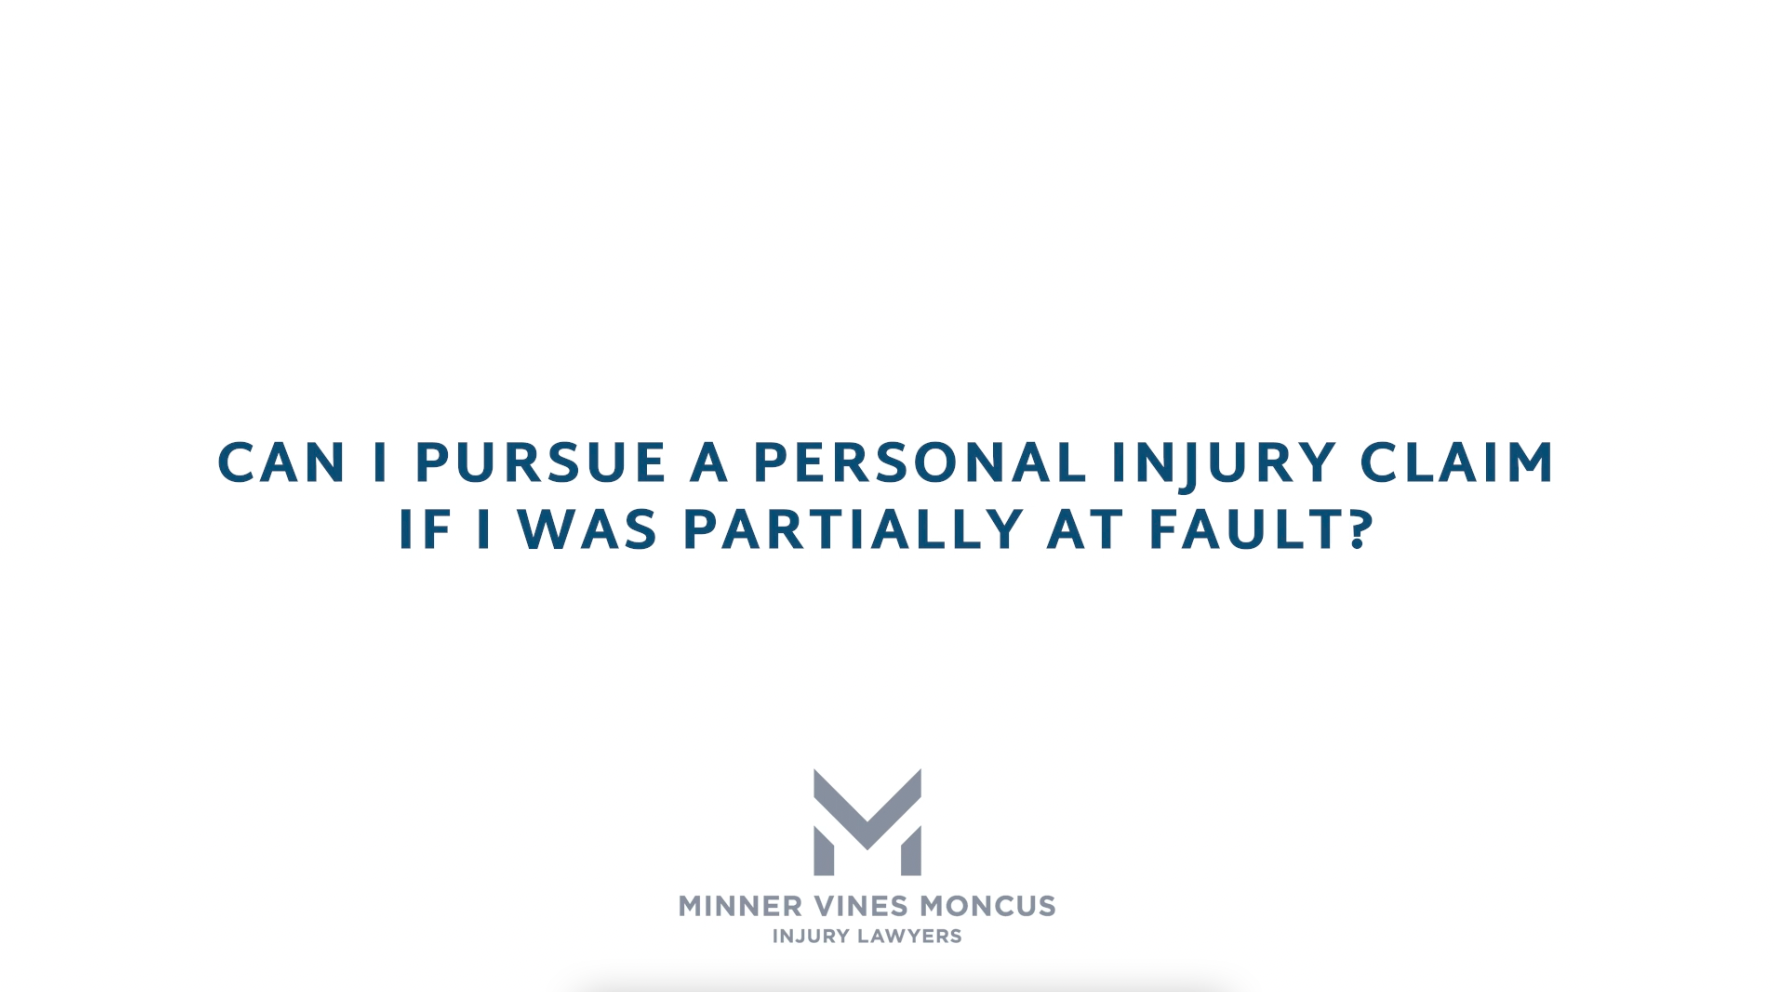 Can I pursue a personal injury claim if I was partially at fault?